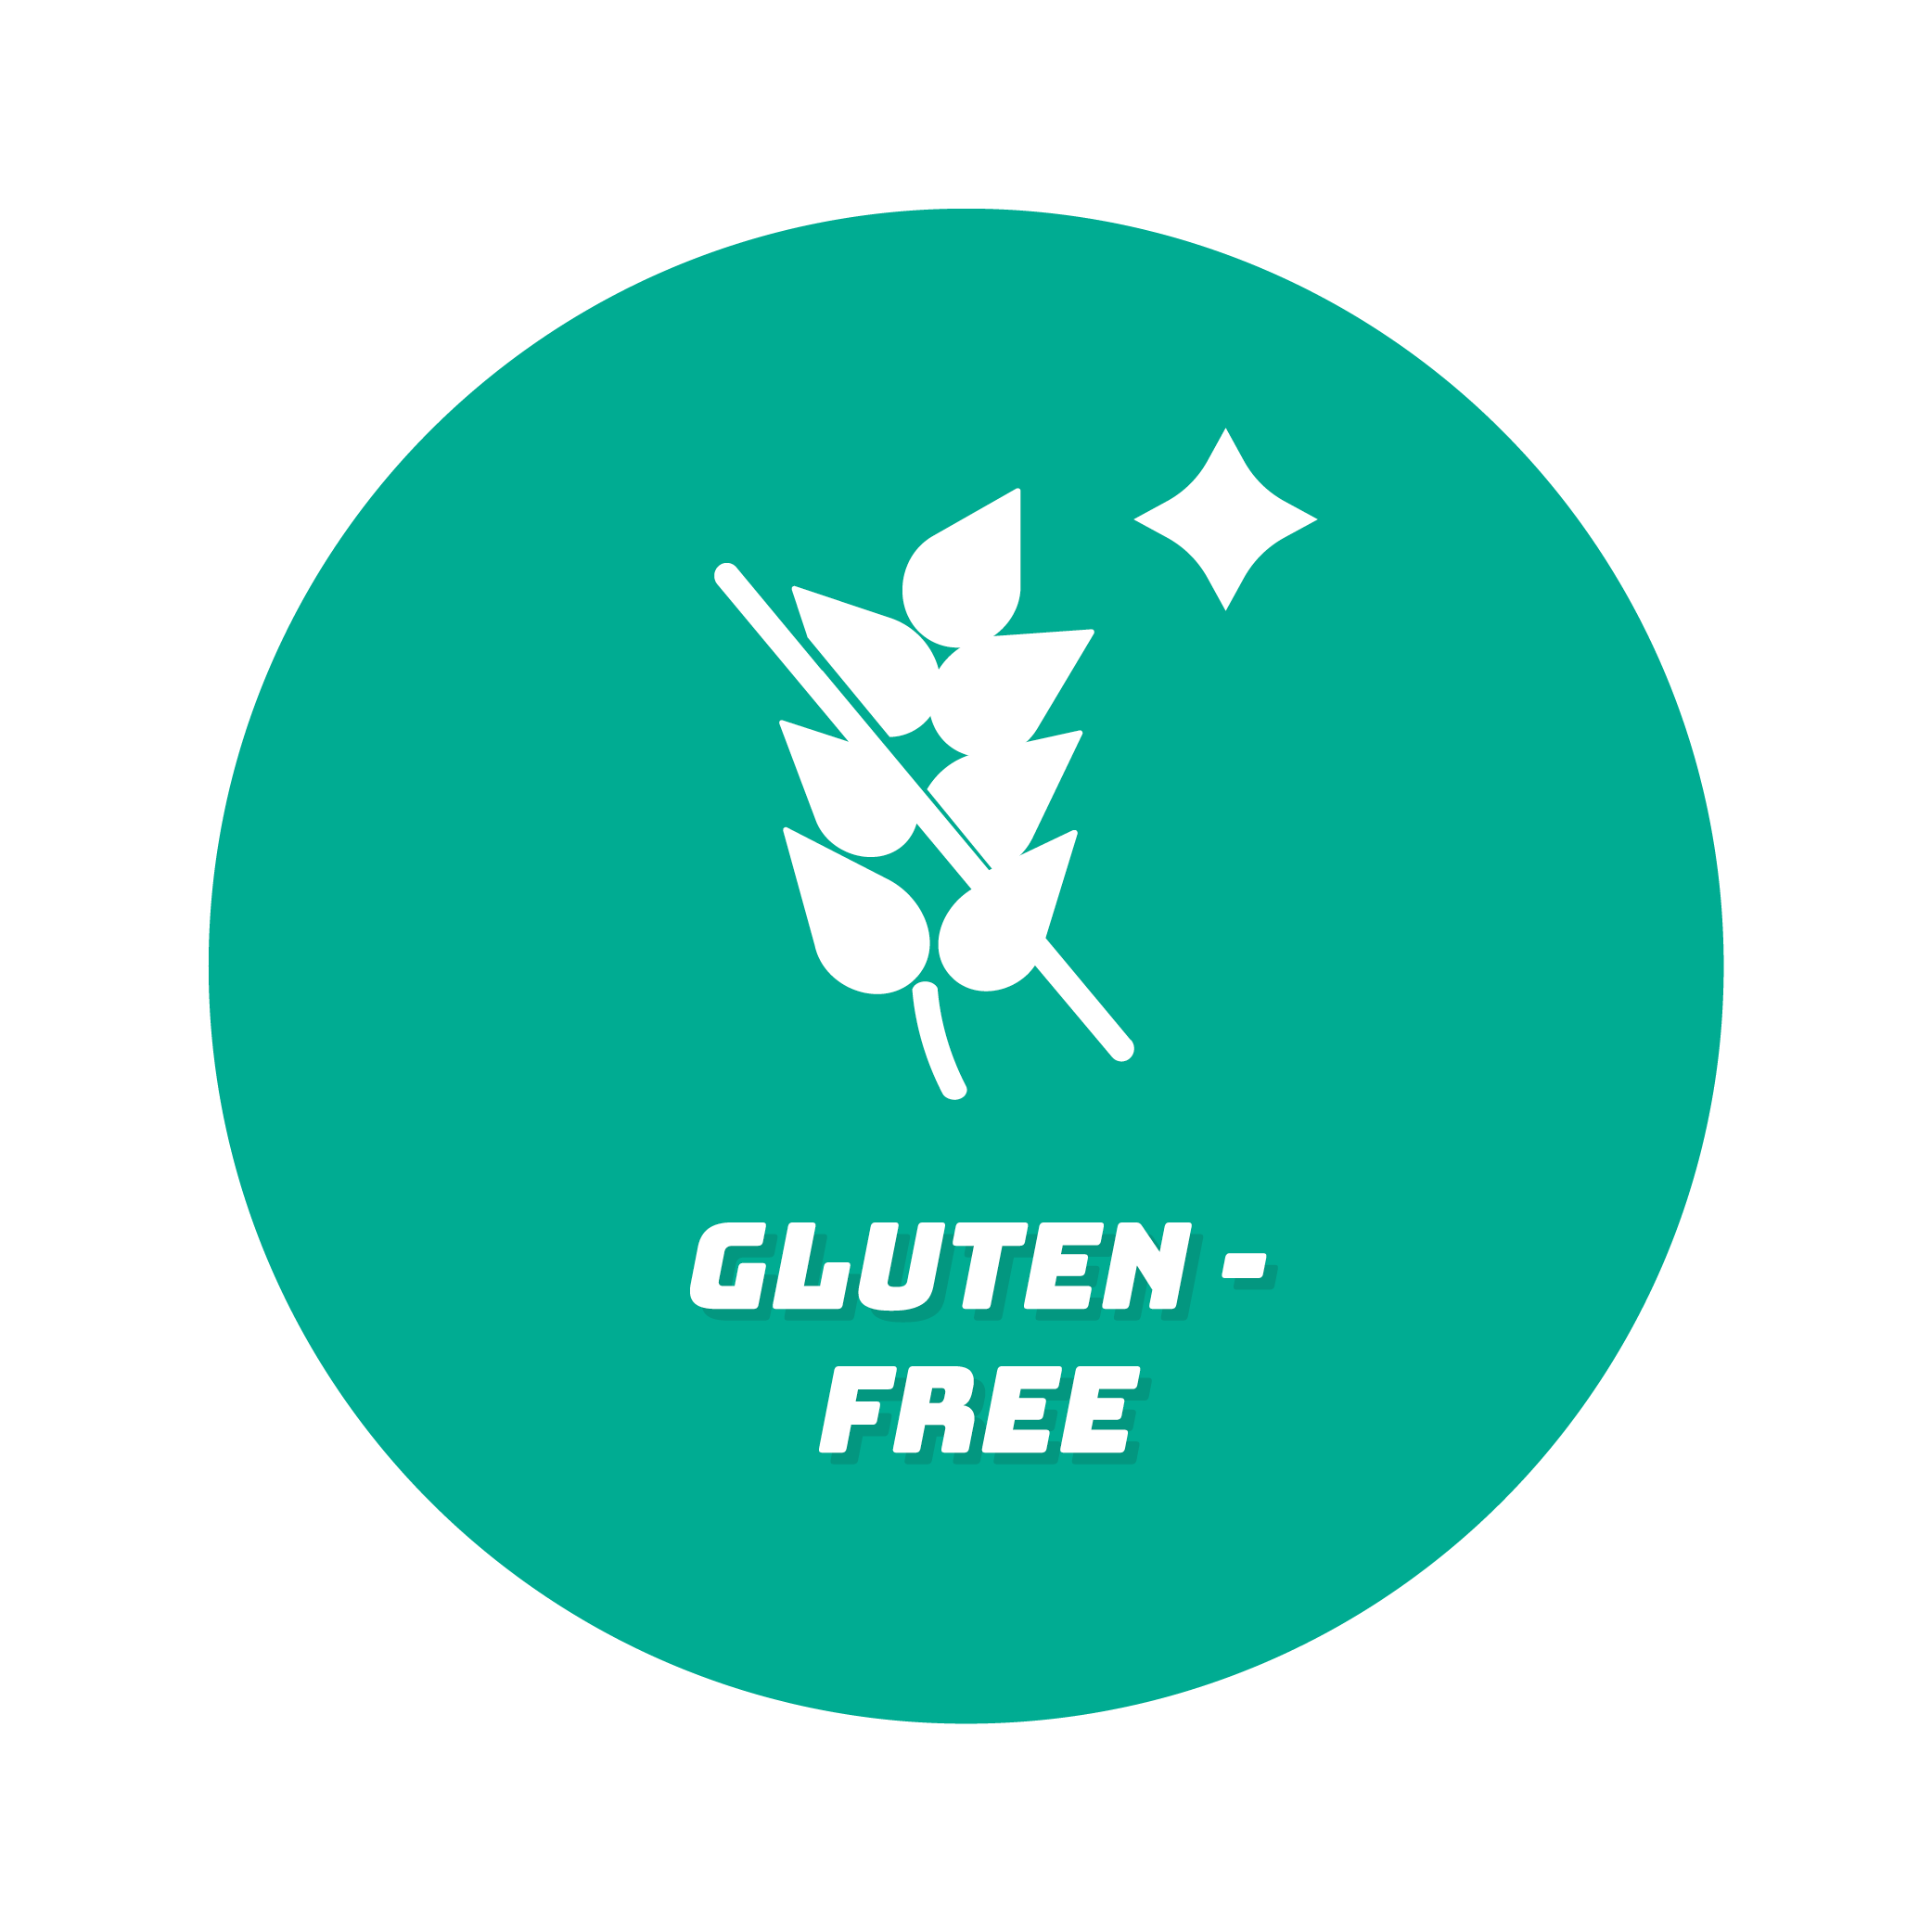 an icon of wheat crossed out, symbolizing gluten-free..